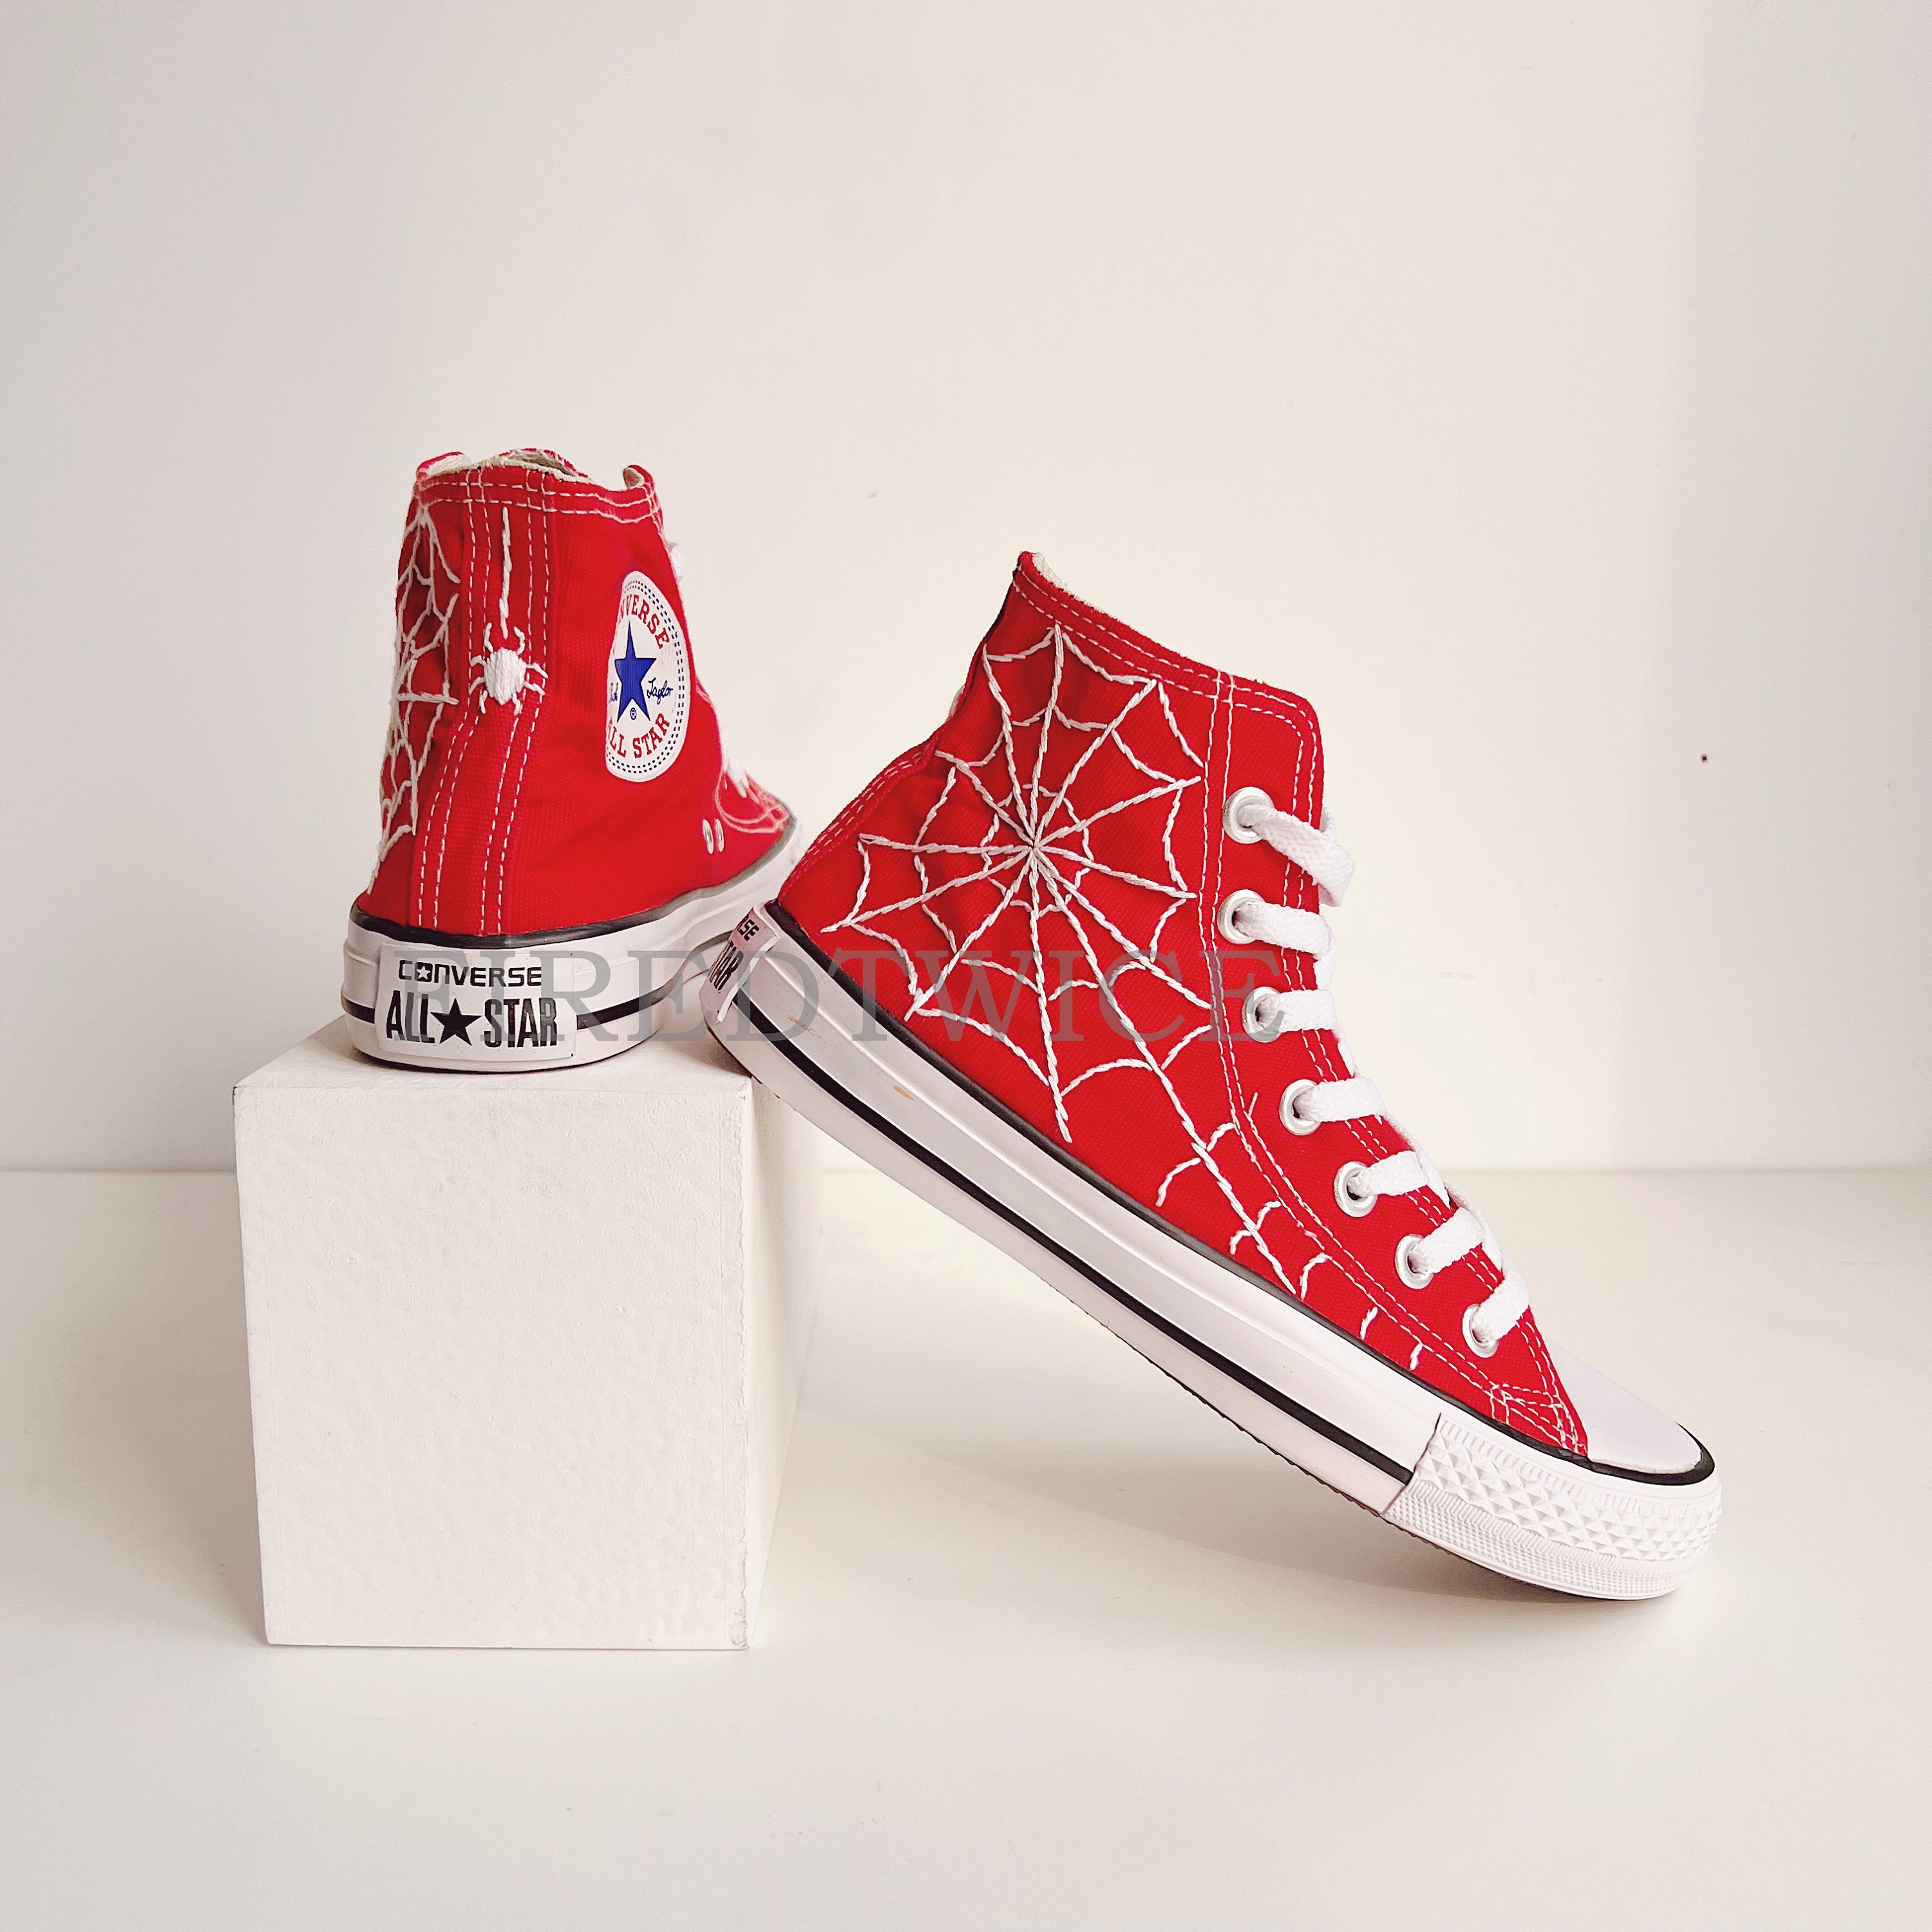 Alice Stolpe projektor Spider Man Converse Embroidery Shoes Custom Spider Web - Etsy